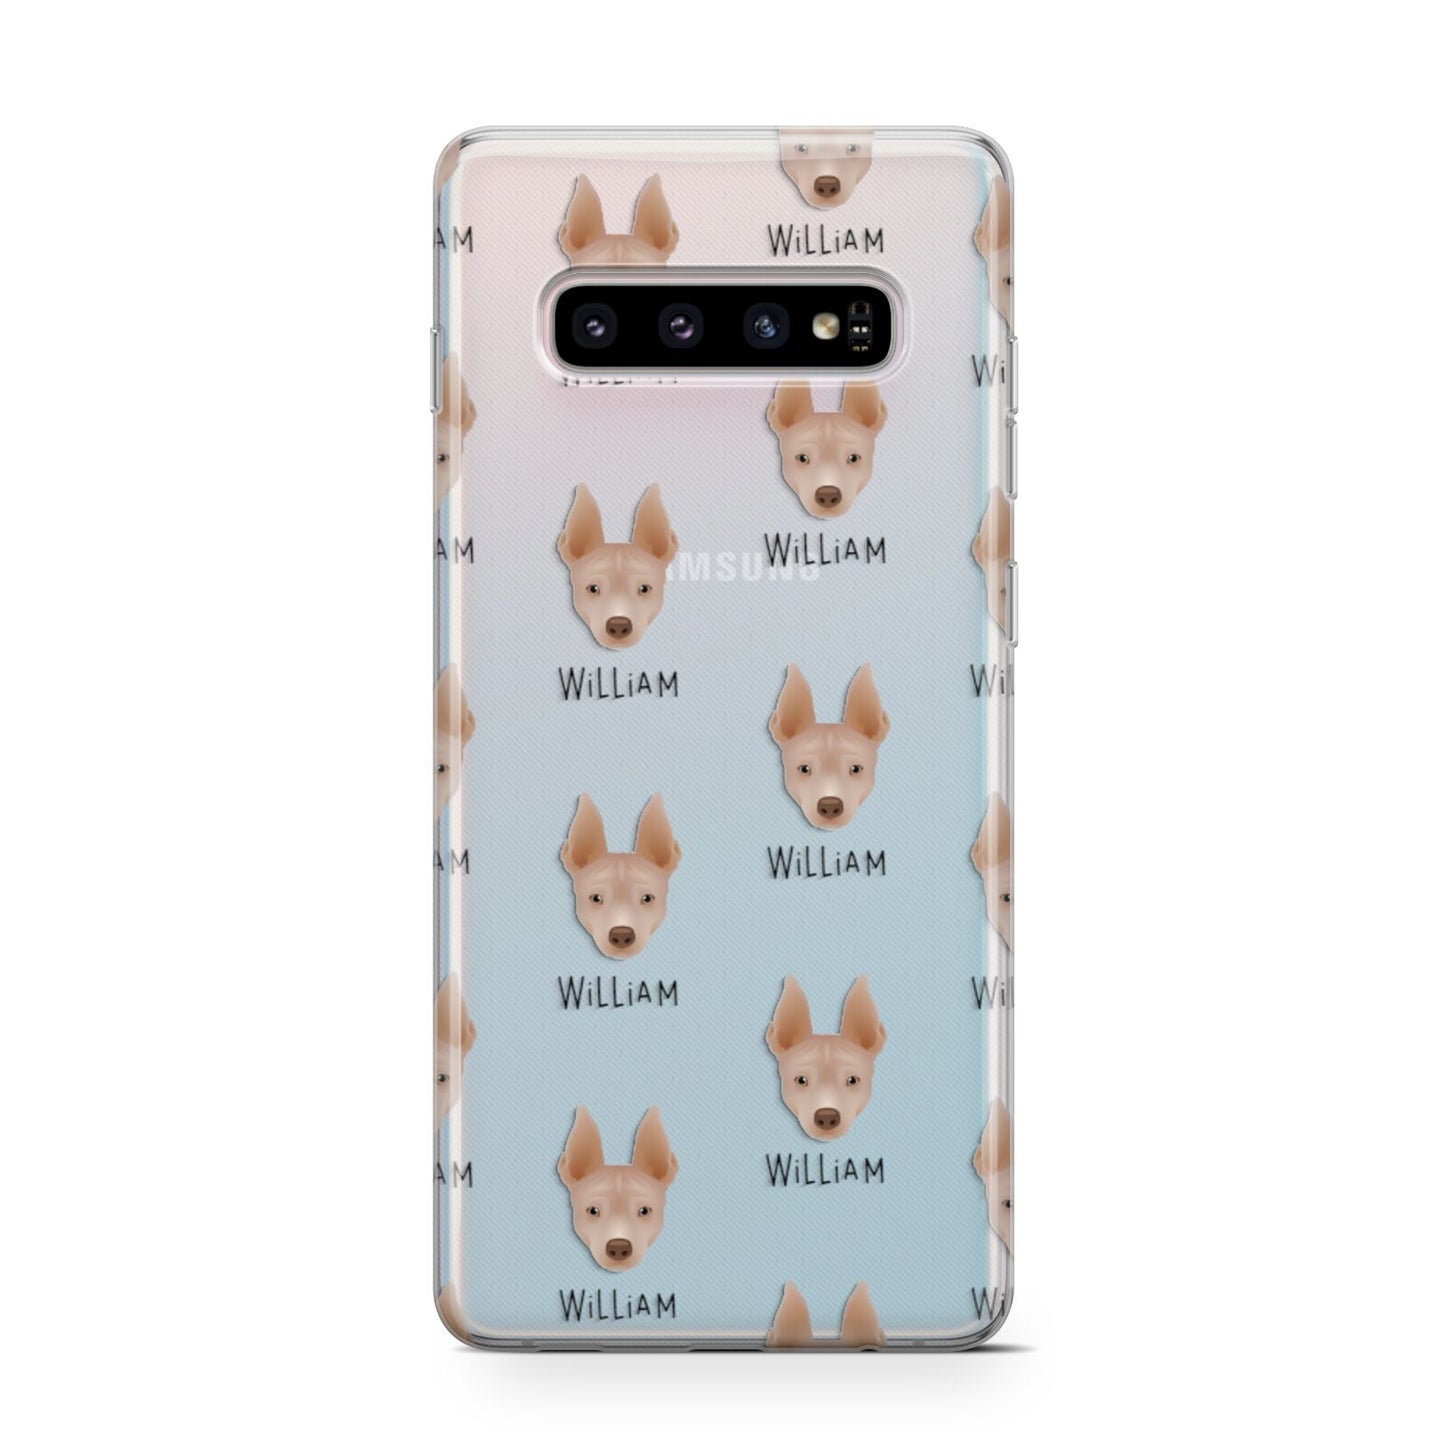 American Hairless Terrier Icon with Name Samsung Galaxy S10 Case